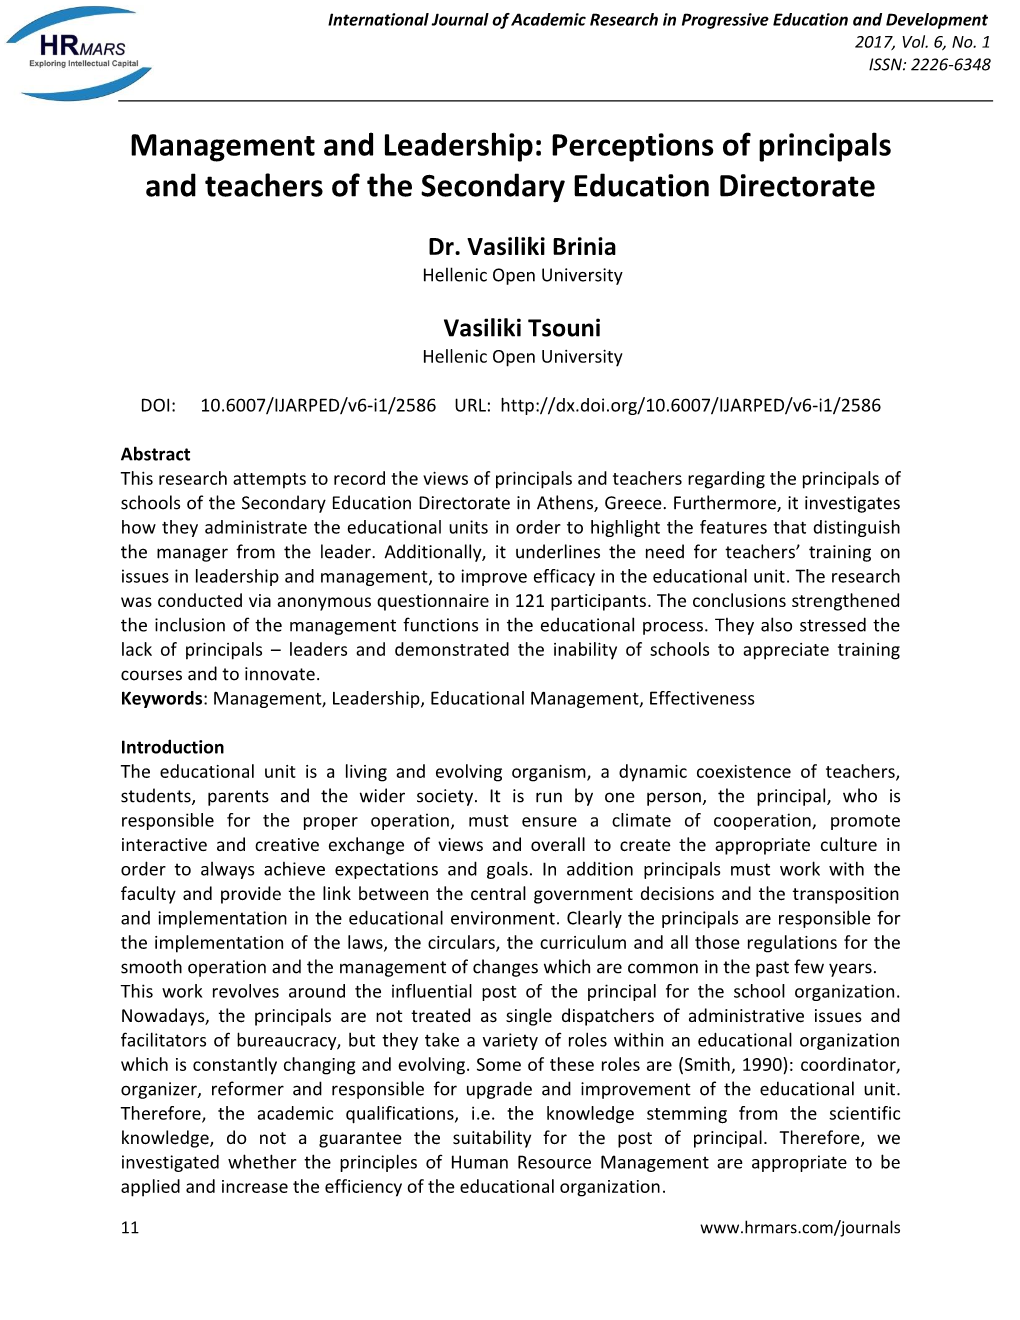 Management and Leadership: Perceptions of Principals and Teachers of the Secondary Education Directorate